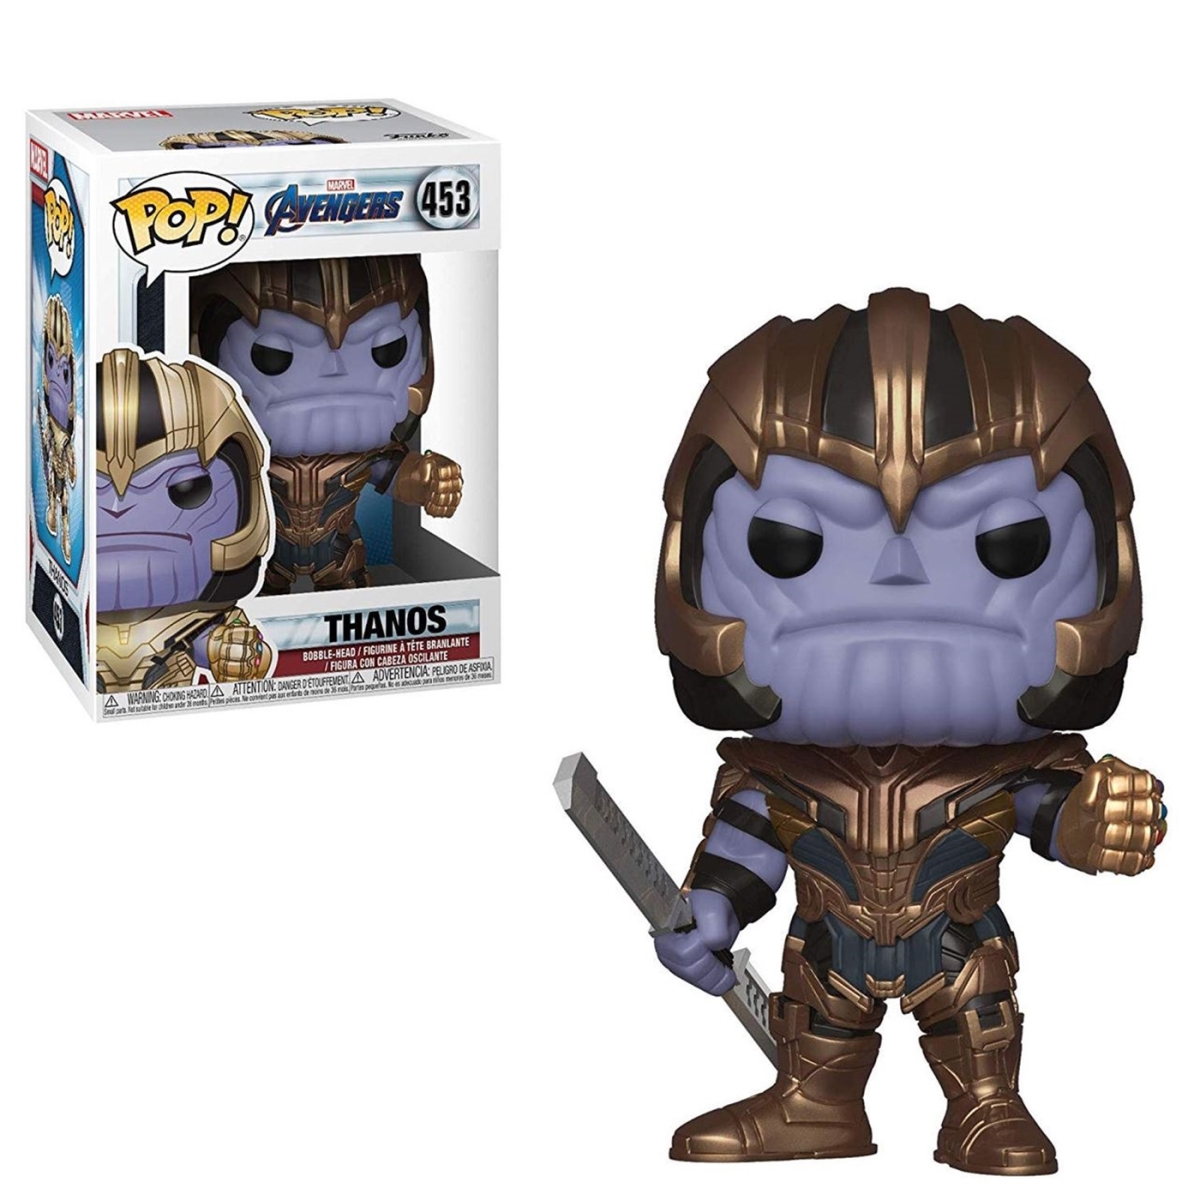 Avengers Endgame 111944 Funko Pop Marvel Thanos Action Figure From Unbeatablesale Com Daily Mail - avengers endgame movie in roblox playing as thanos